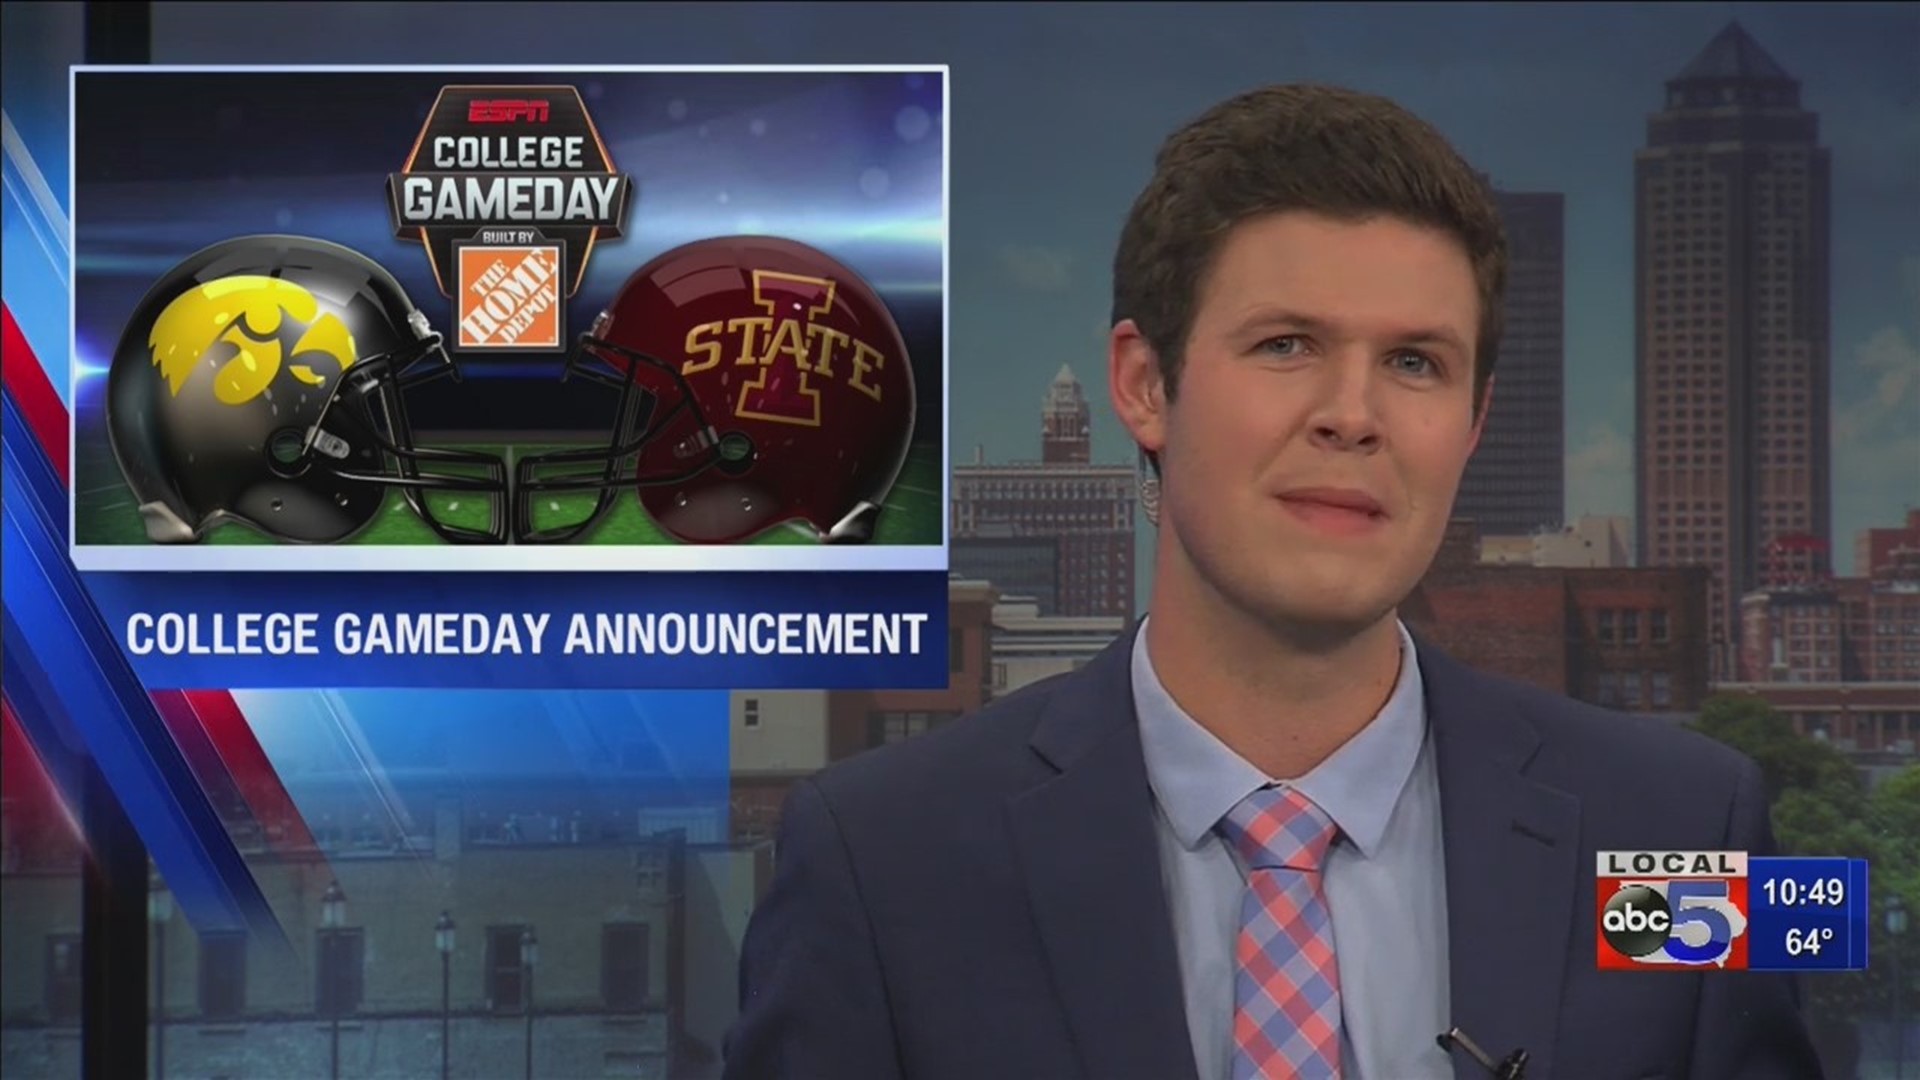 College Gameday to Ames